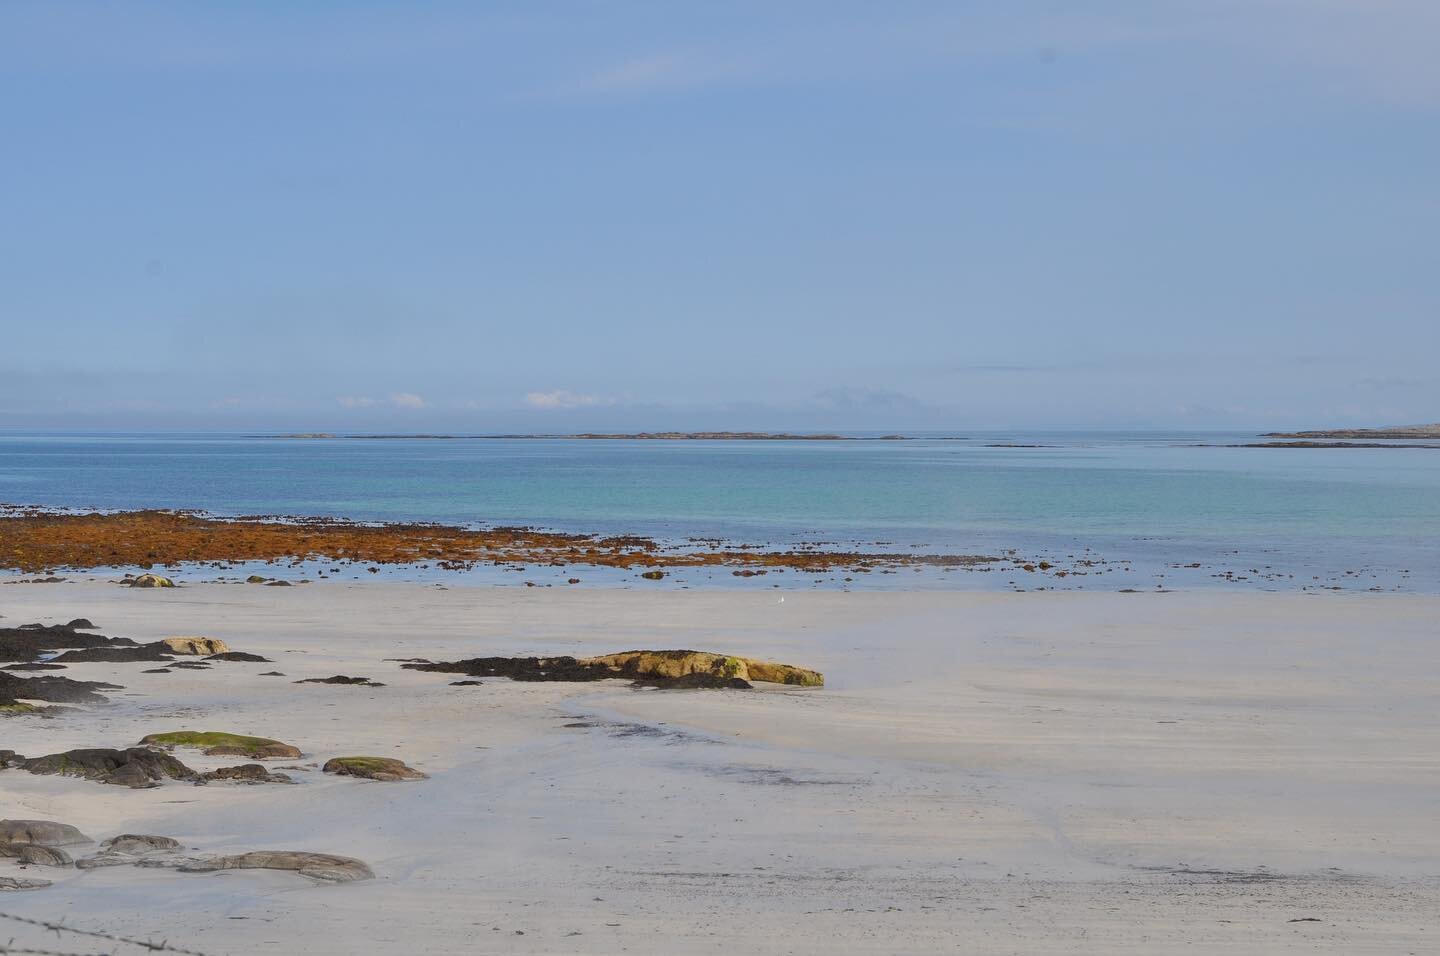 A lovely week away to the Isle of Tiree. Beautiful colours amid the mist and sun. 

#coast2coastarchitects #architecture #landscape #landscapephotography #tiree #beach #mist #seaweed #scottisharchitecture #architektur #travel #architecturephotography